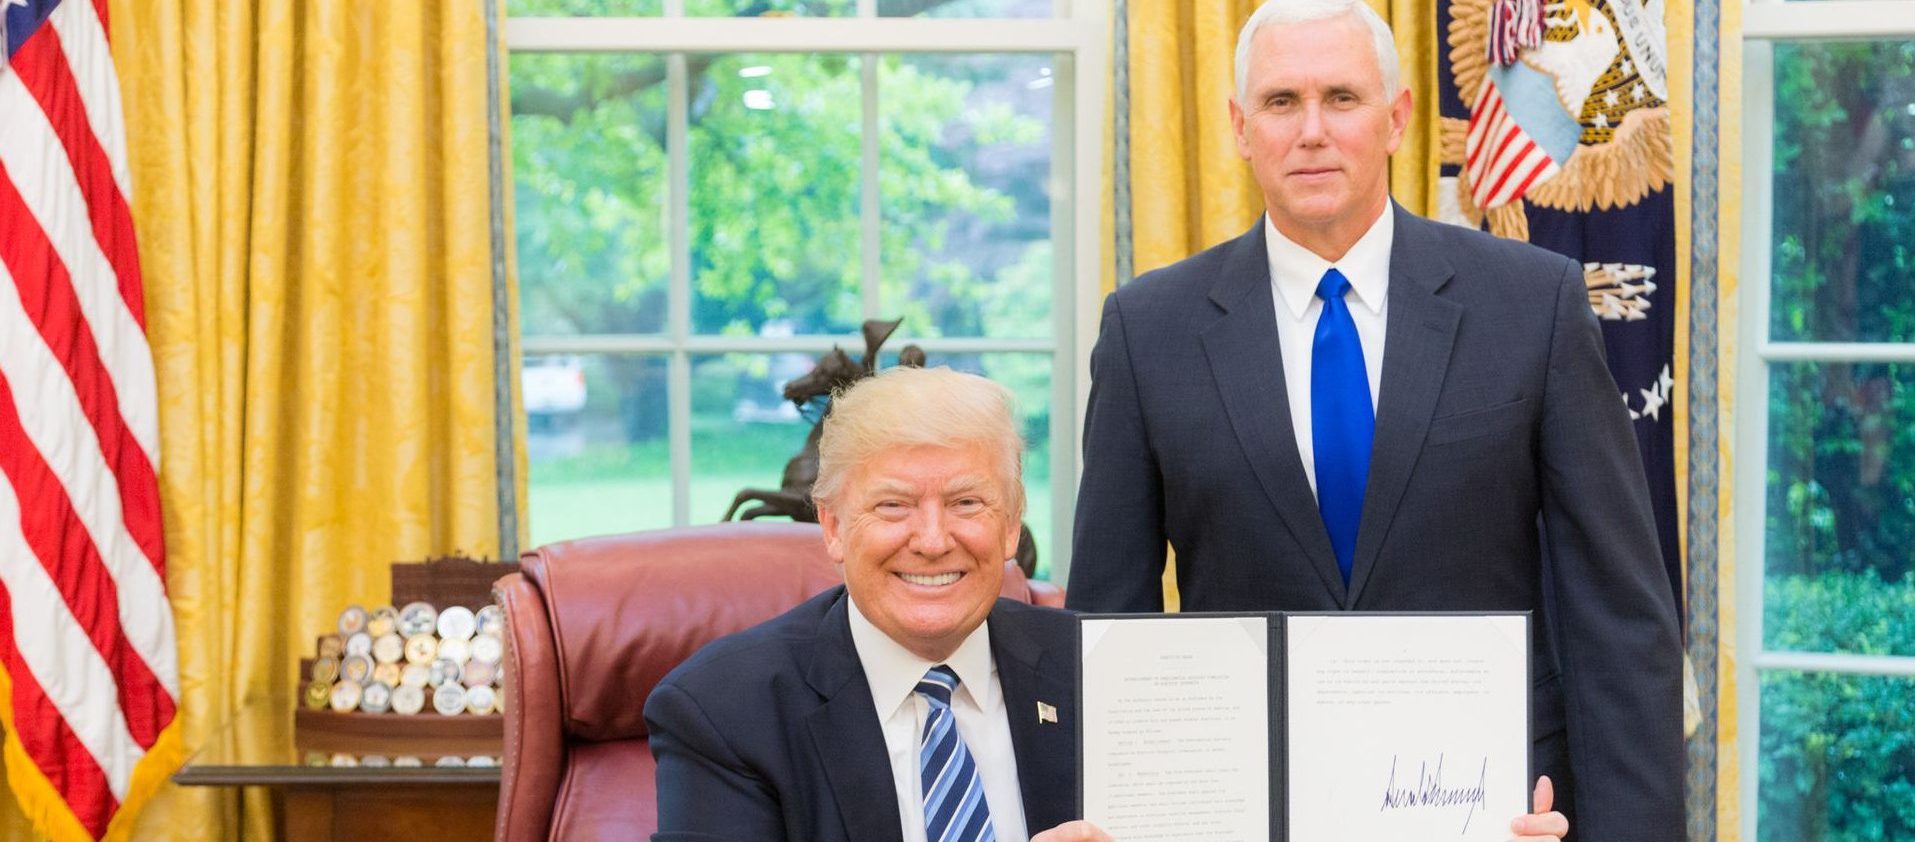 President Trump Is Joined By Vice President Pence For An Executive Order Signing 33803971533 2 1 E1530904494773